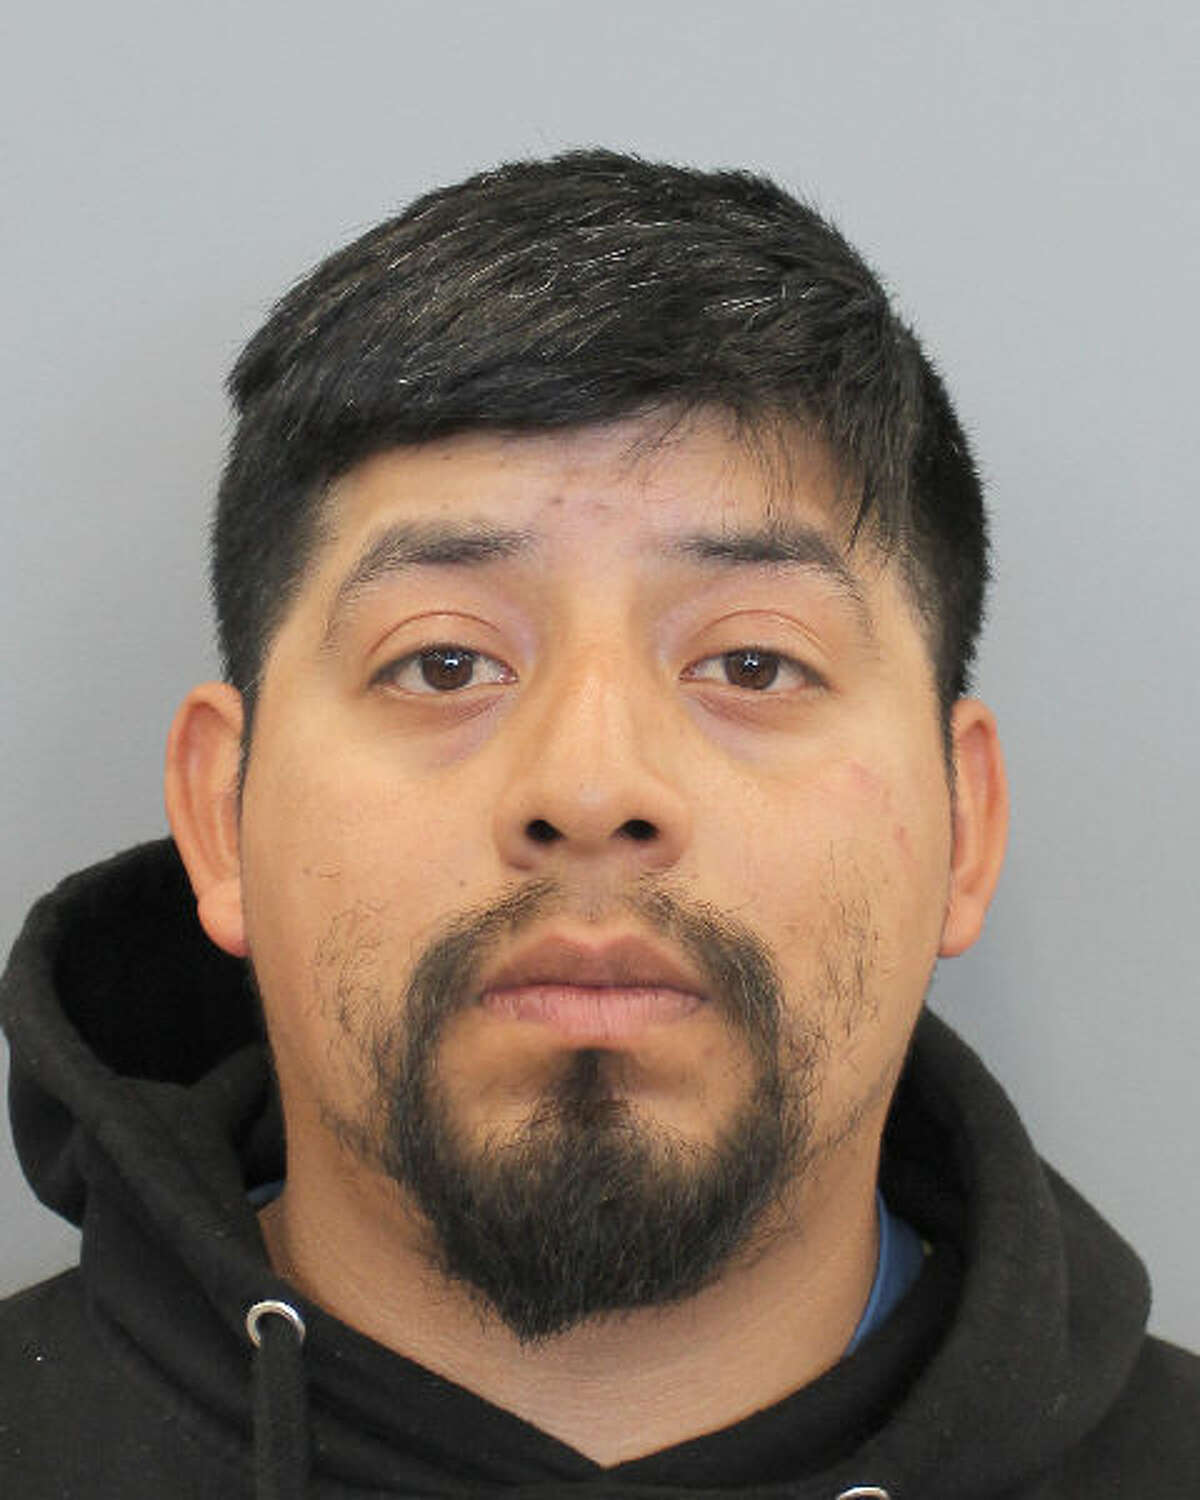 Jose Manuel Fernandez Ortiz, 28, is charged with DWI in connection to a fatal crash Monday on March 14, 2022.